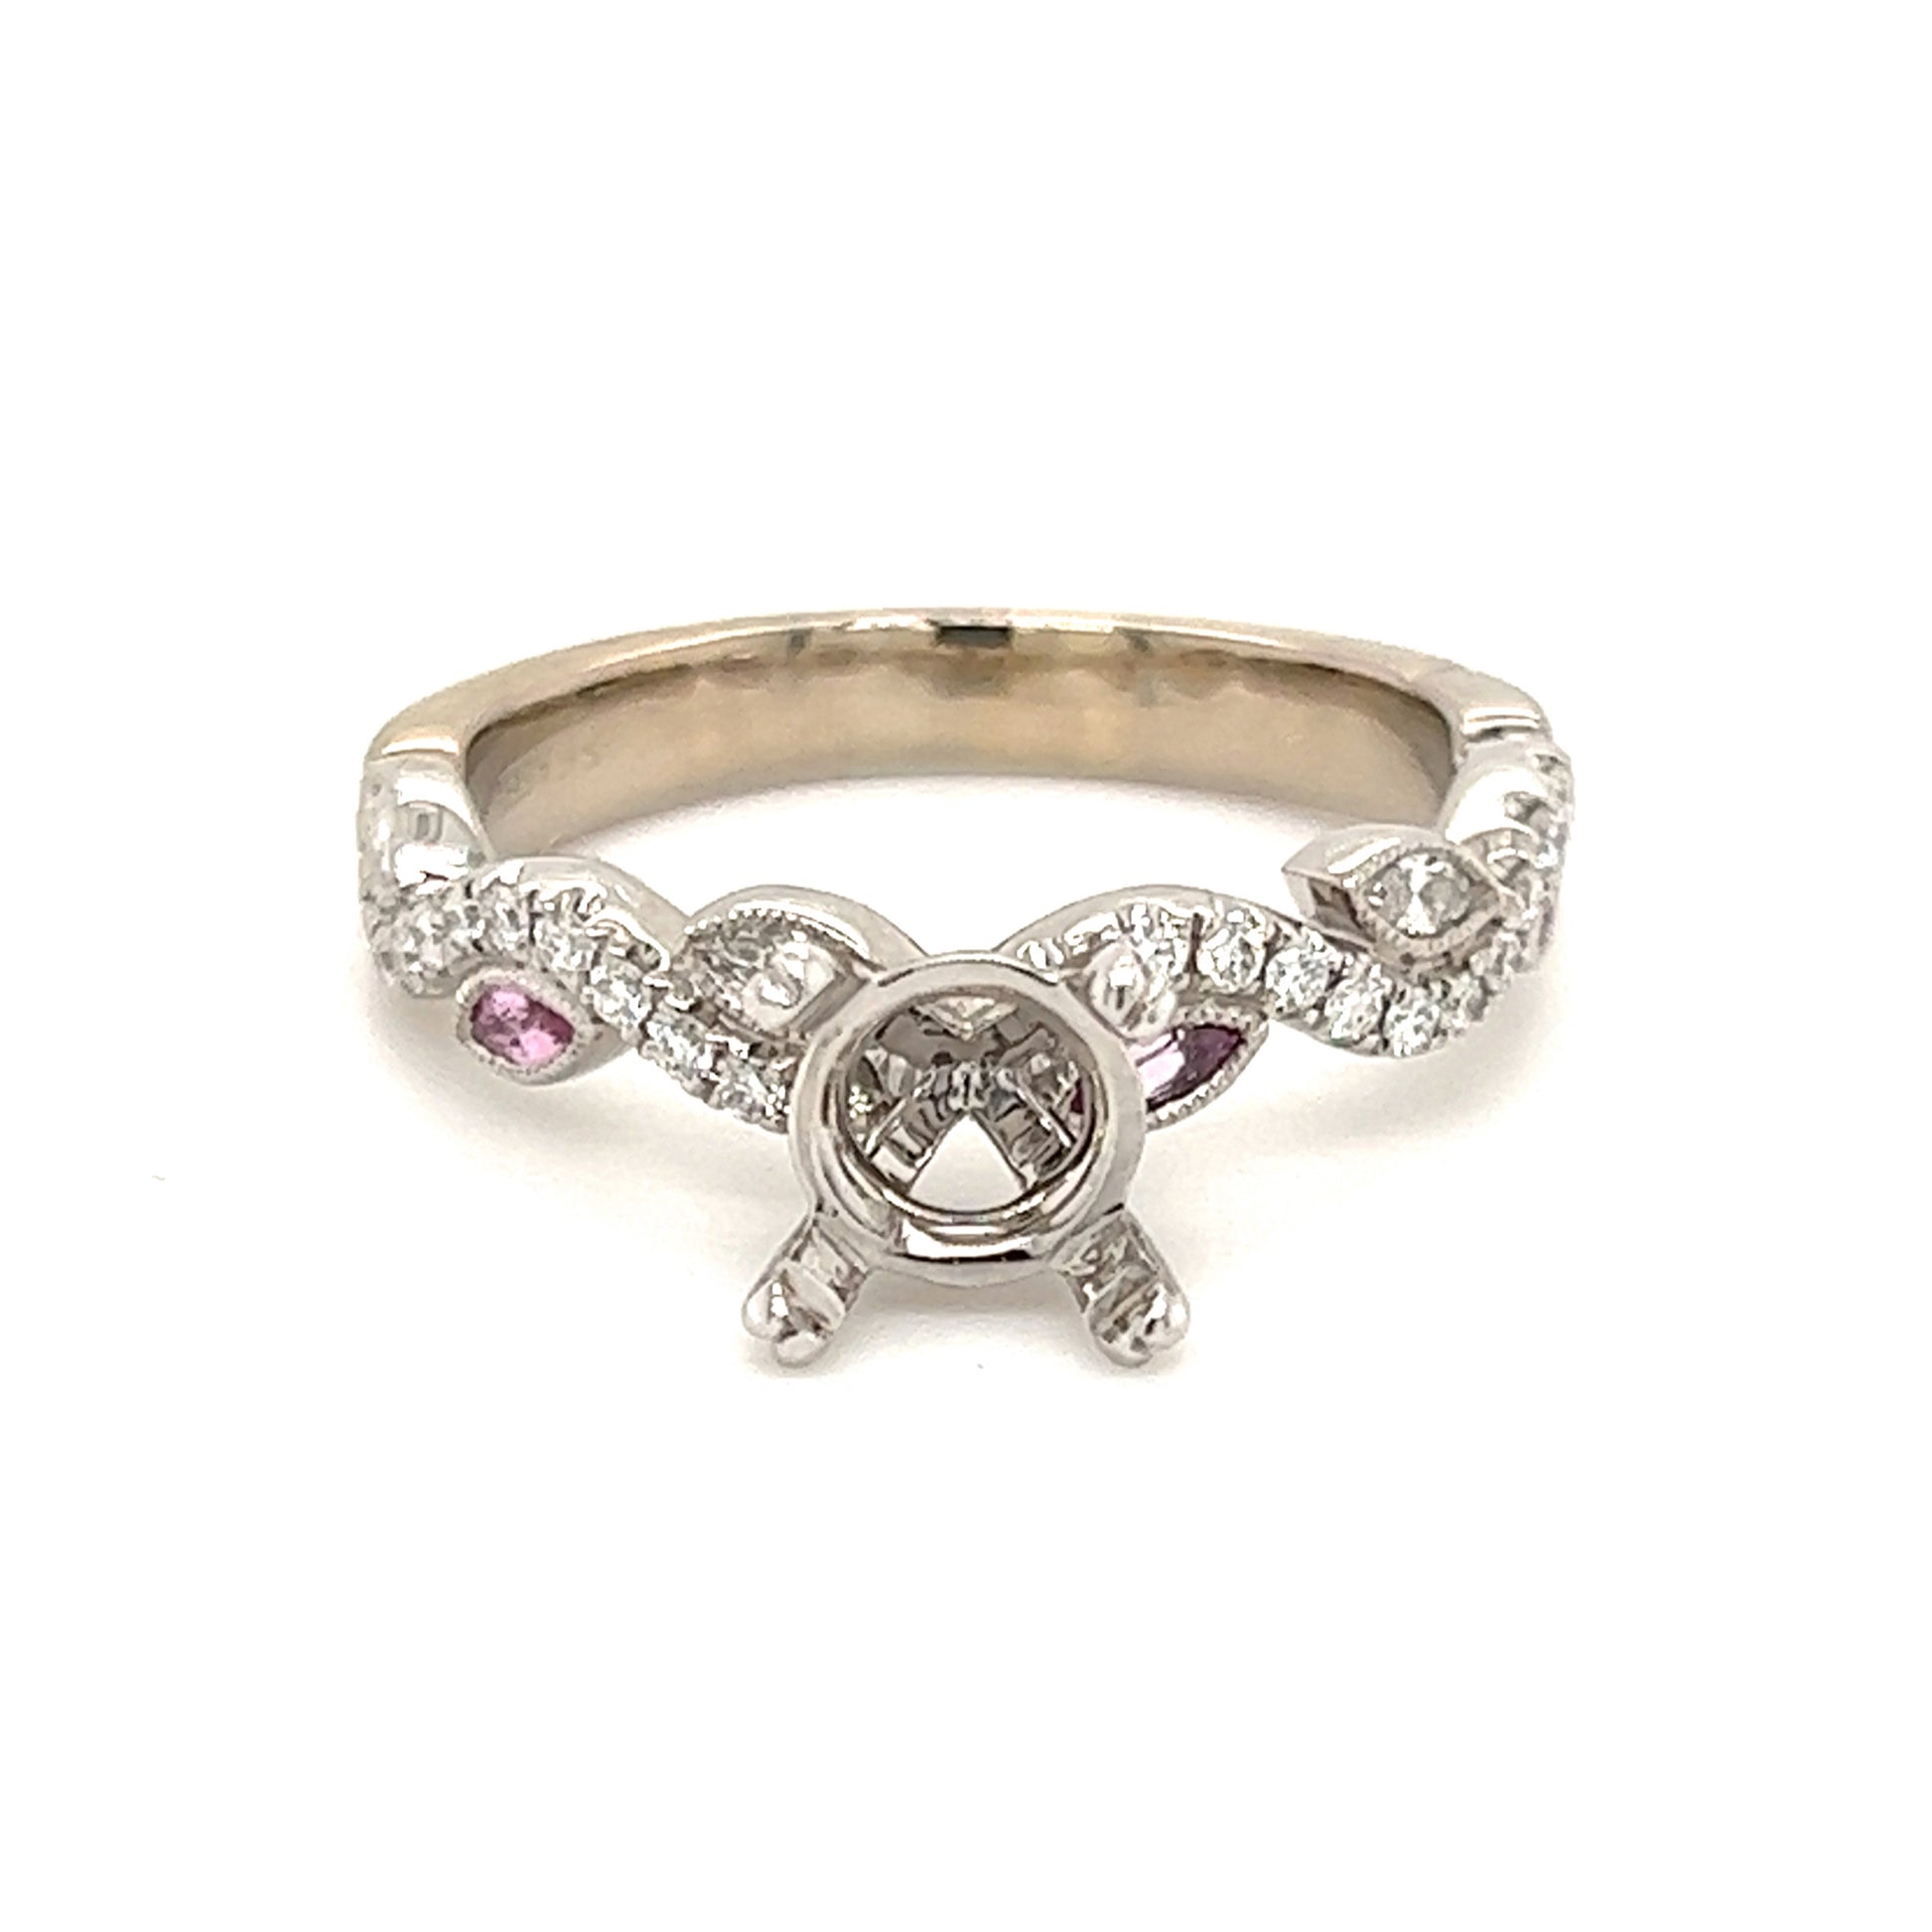 Vine Motif Ring Setting with Pink Sapphires and Diamond Accents in 14K White Gold Front View